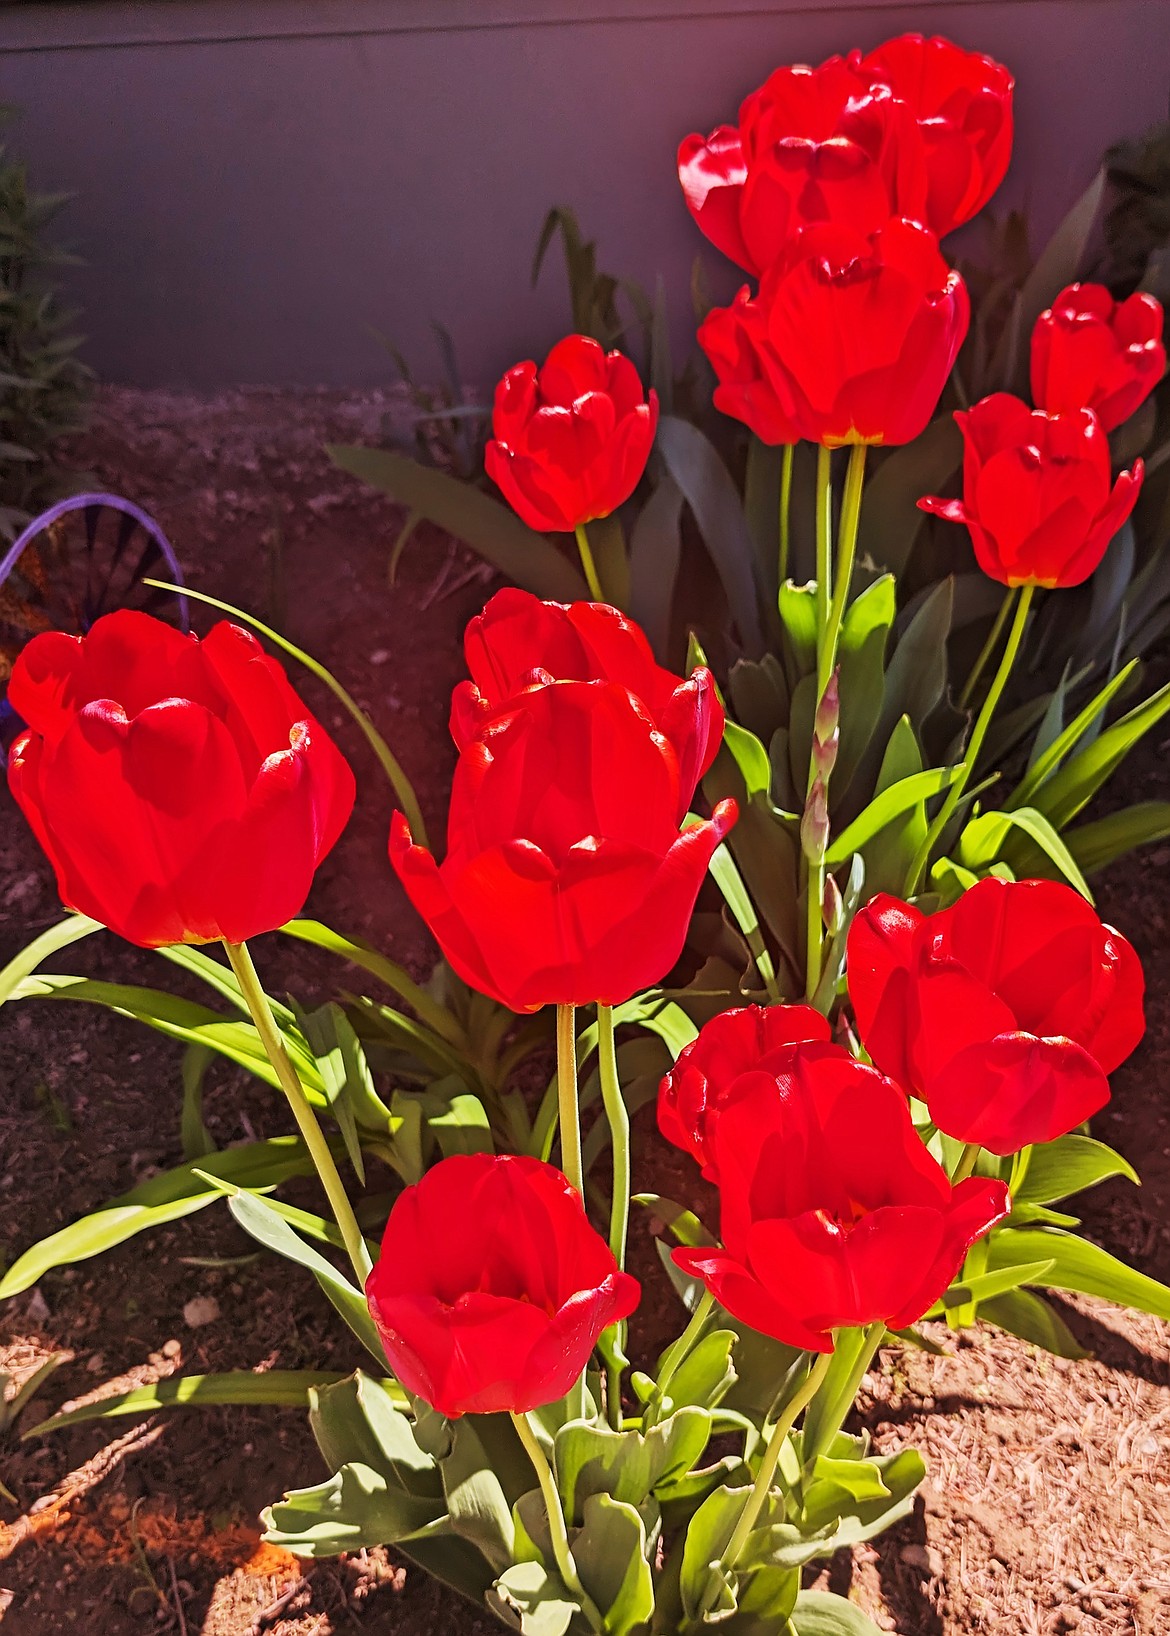 Jack Staff shared this Best Shot of red tulips making an appearance in the garden. If you have a photo that you took that you would like to see run as a Best Shot or I Took The Bee send it in to the Bonner County Daily Bee, P.O. Box 159, Sandpoint, Idaho, 83864; or drop them off at 310 Church St., Sandpoint. You may also email your pictures to the Bonner County Daily Bee along with your name, caption information, hometown, and phone number to news@bonnercountydailybee.com.